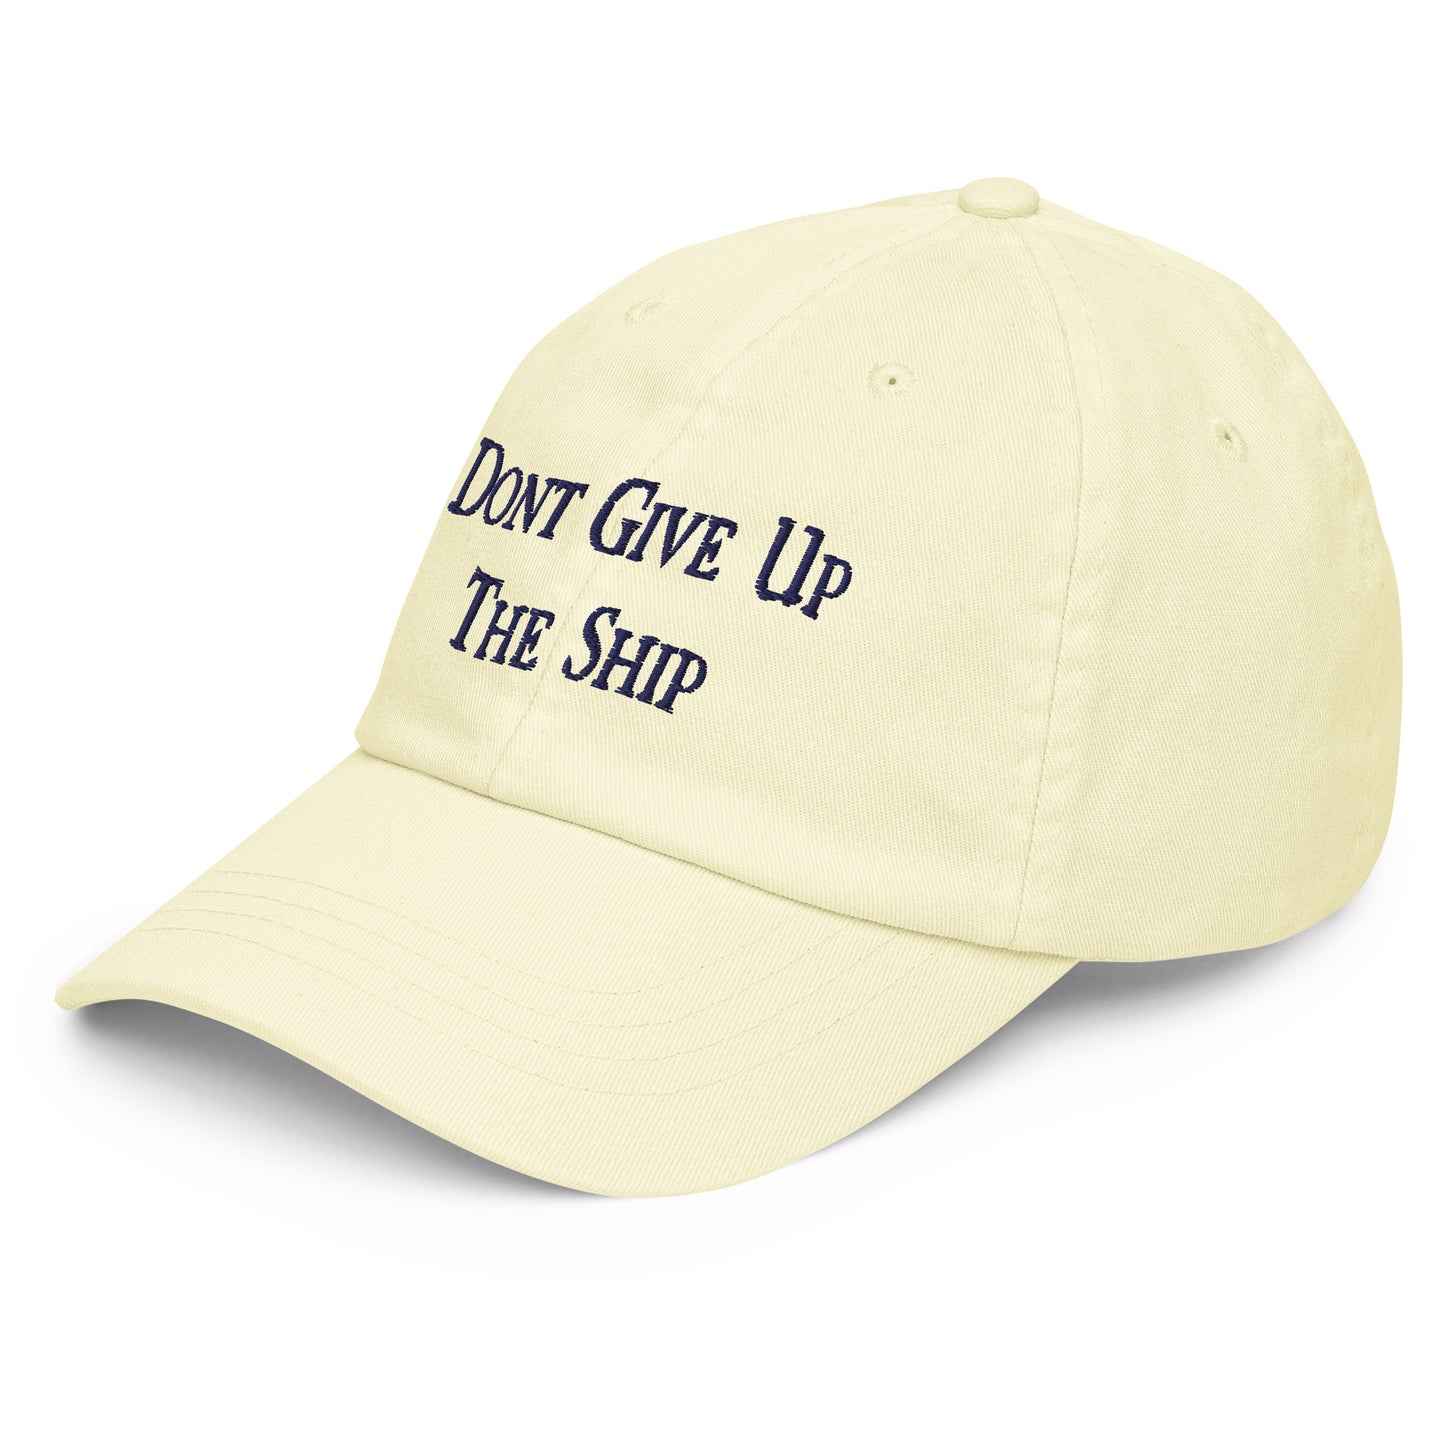 Don't Give Up The Ship Embroidered Pastel Hat